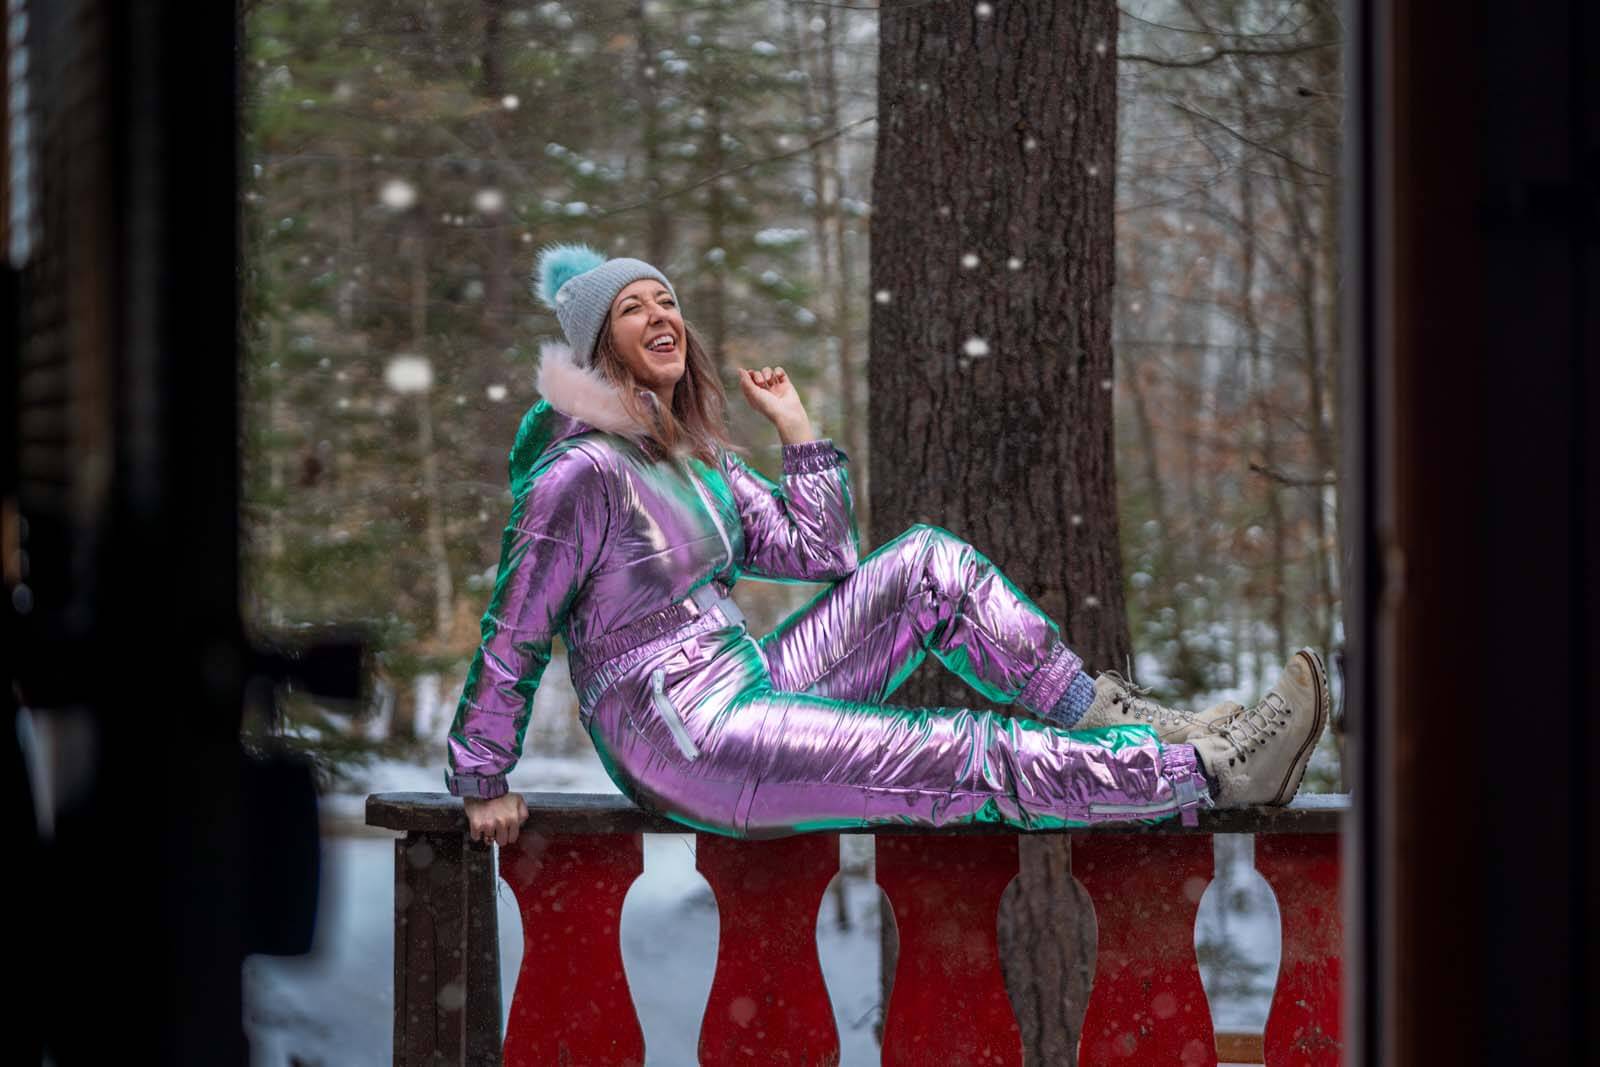 Megan in her electric snow suit with her winter boots on in the Adirondacks in winter